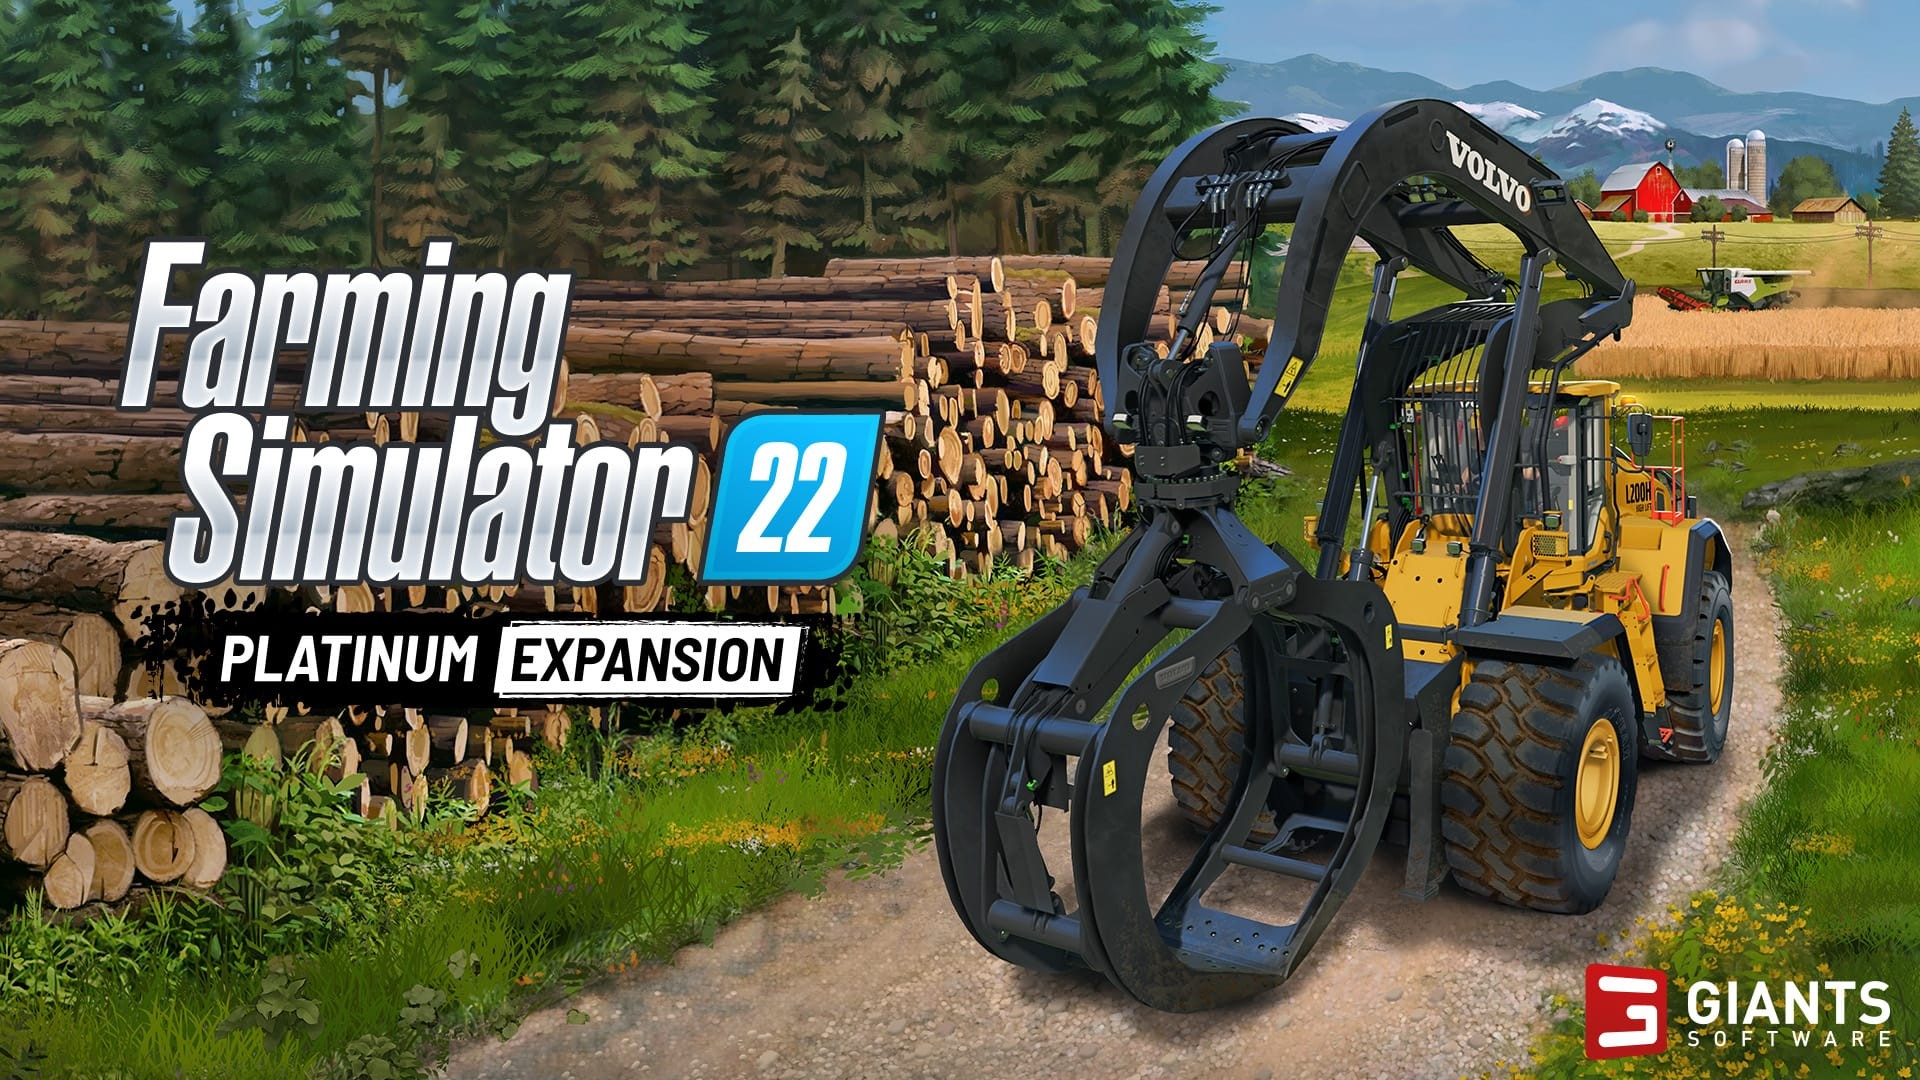 GIANTS Software Reveals Farming Simulator 22 – Platinum Expansion Video Trailer Featuring Volvo Machines From Multiple Decades